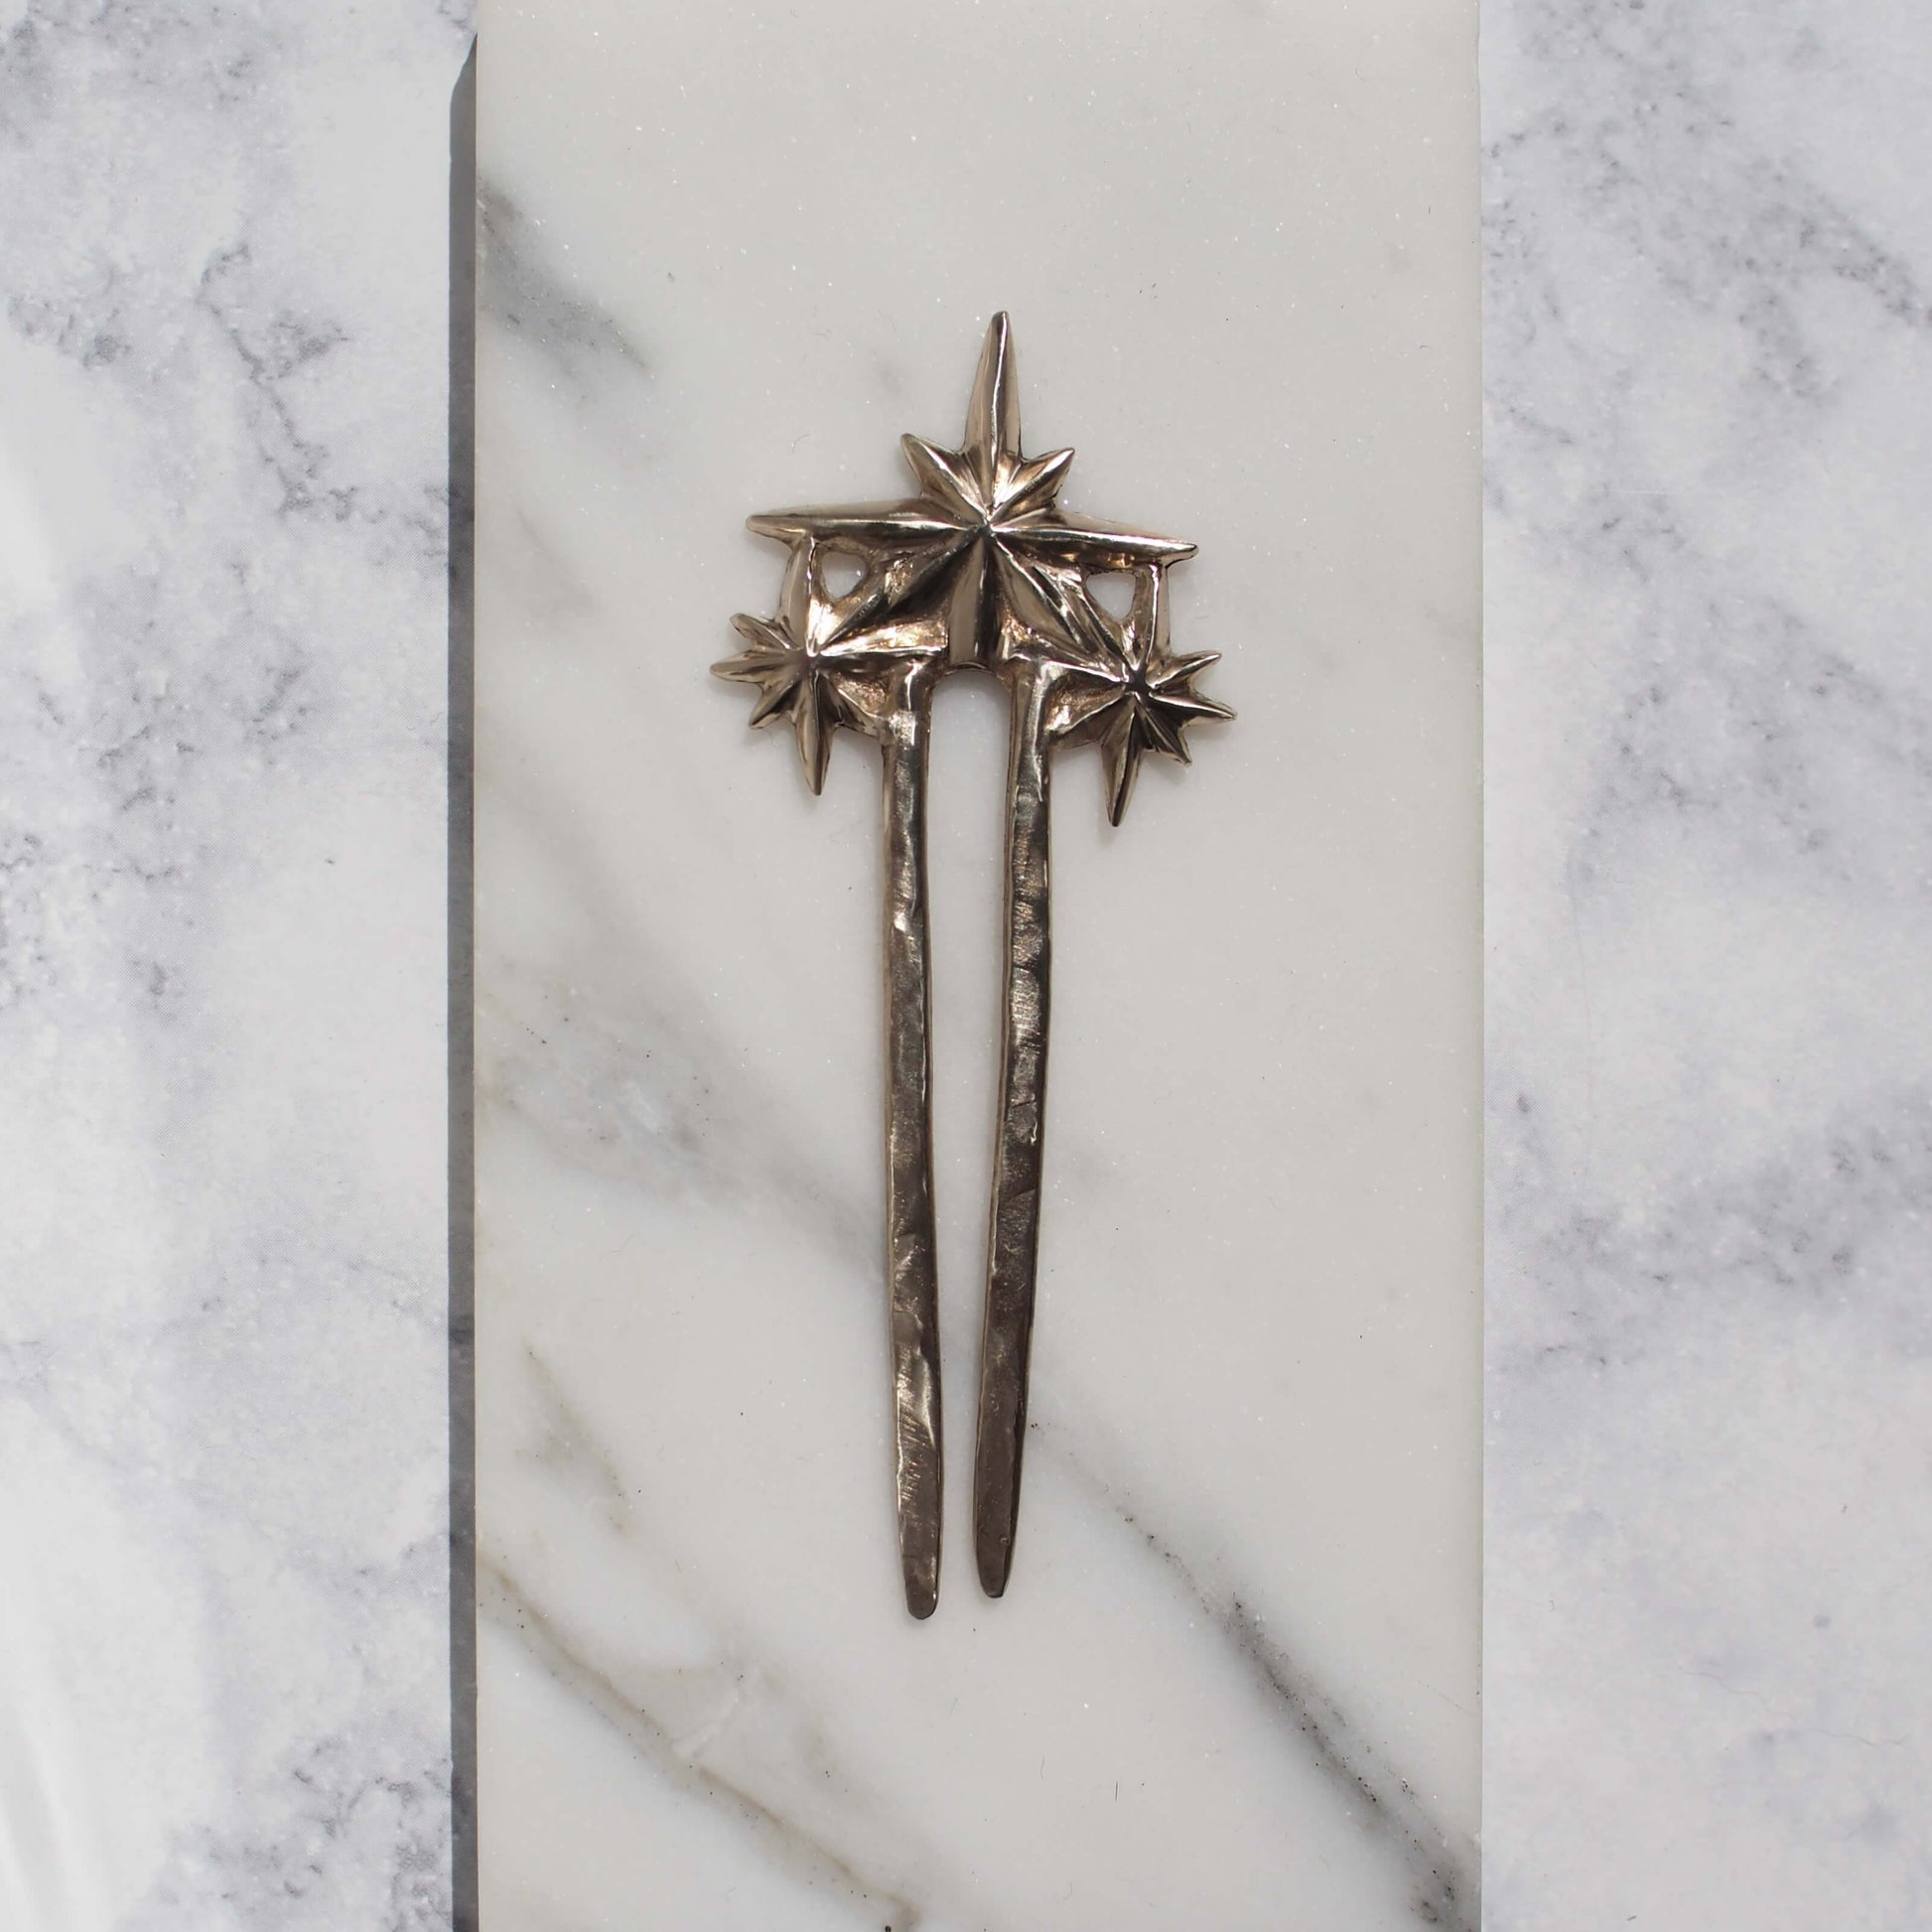 Constellation Star Hair Pin, cast in gold tone bronze, handmade in the USA by Iron Oxide  Edit alt text